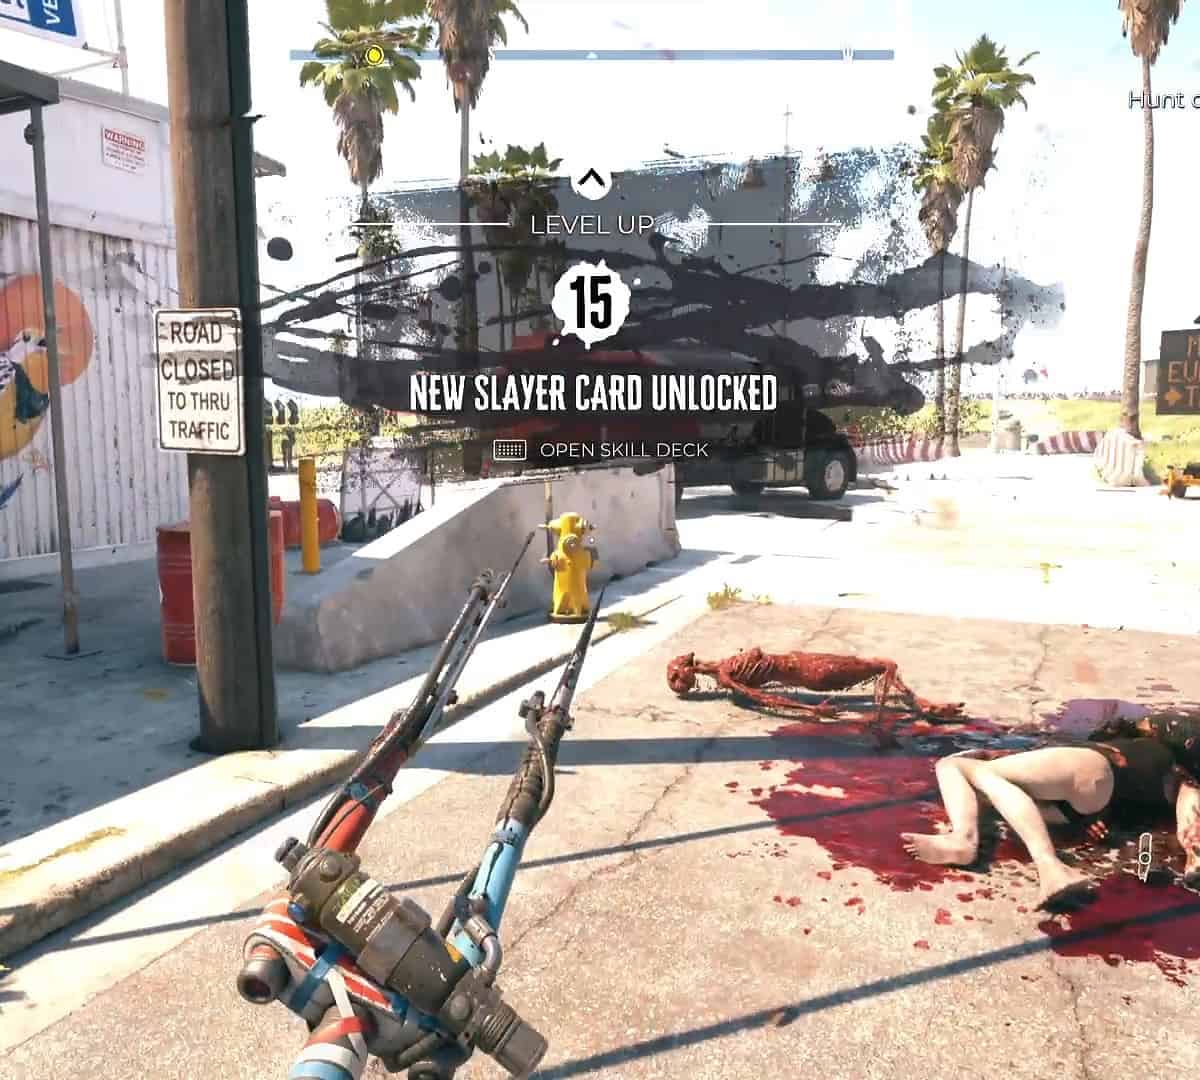 Dead Island 2 review: Holding an electrified pitchfork as the level up splash text is on screen for level 15 with a new slayer card unlocked.